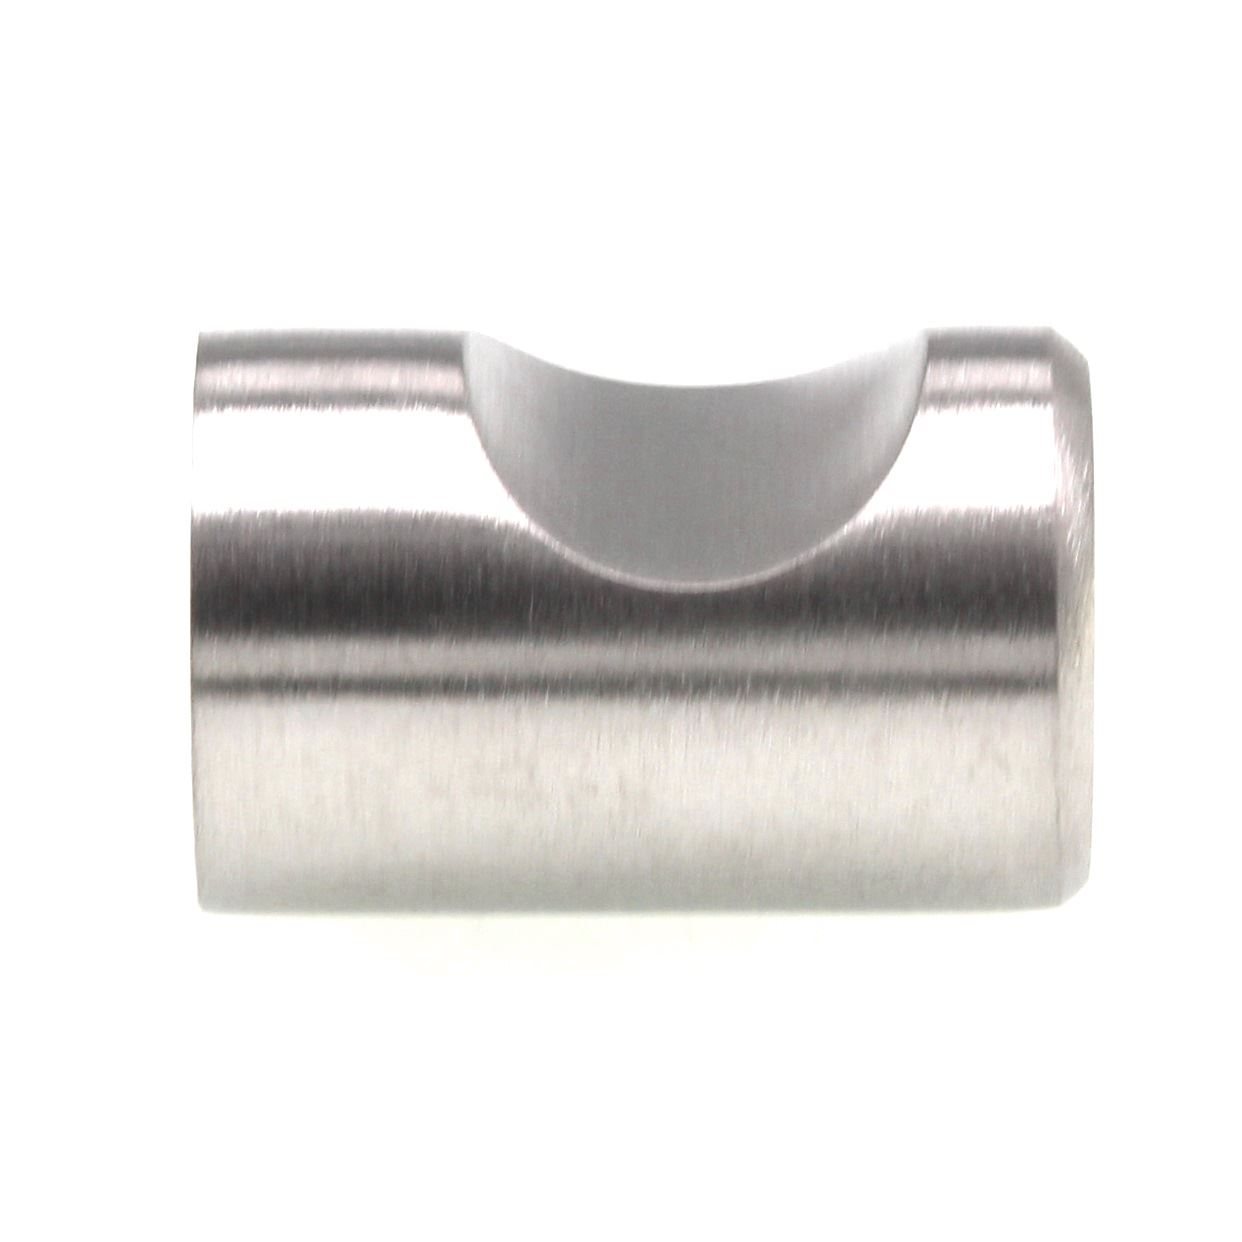 Schaub 1 1/8" x 3/4" Whistle Cabinet Knob Brushed Stainless Steel SS010